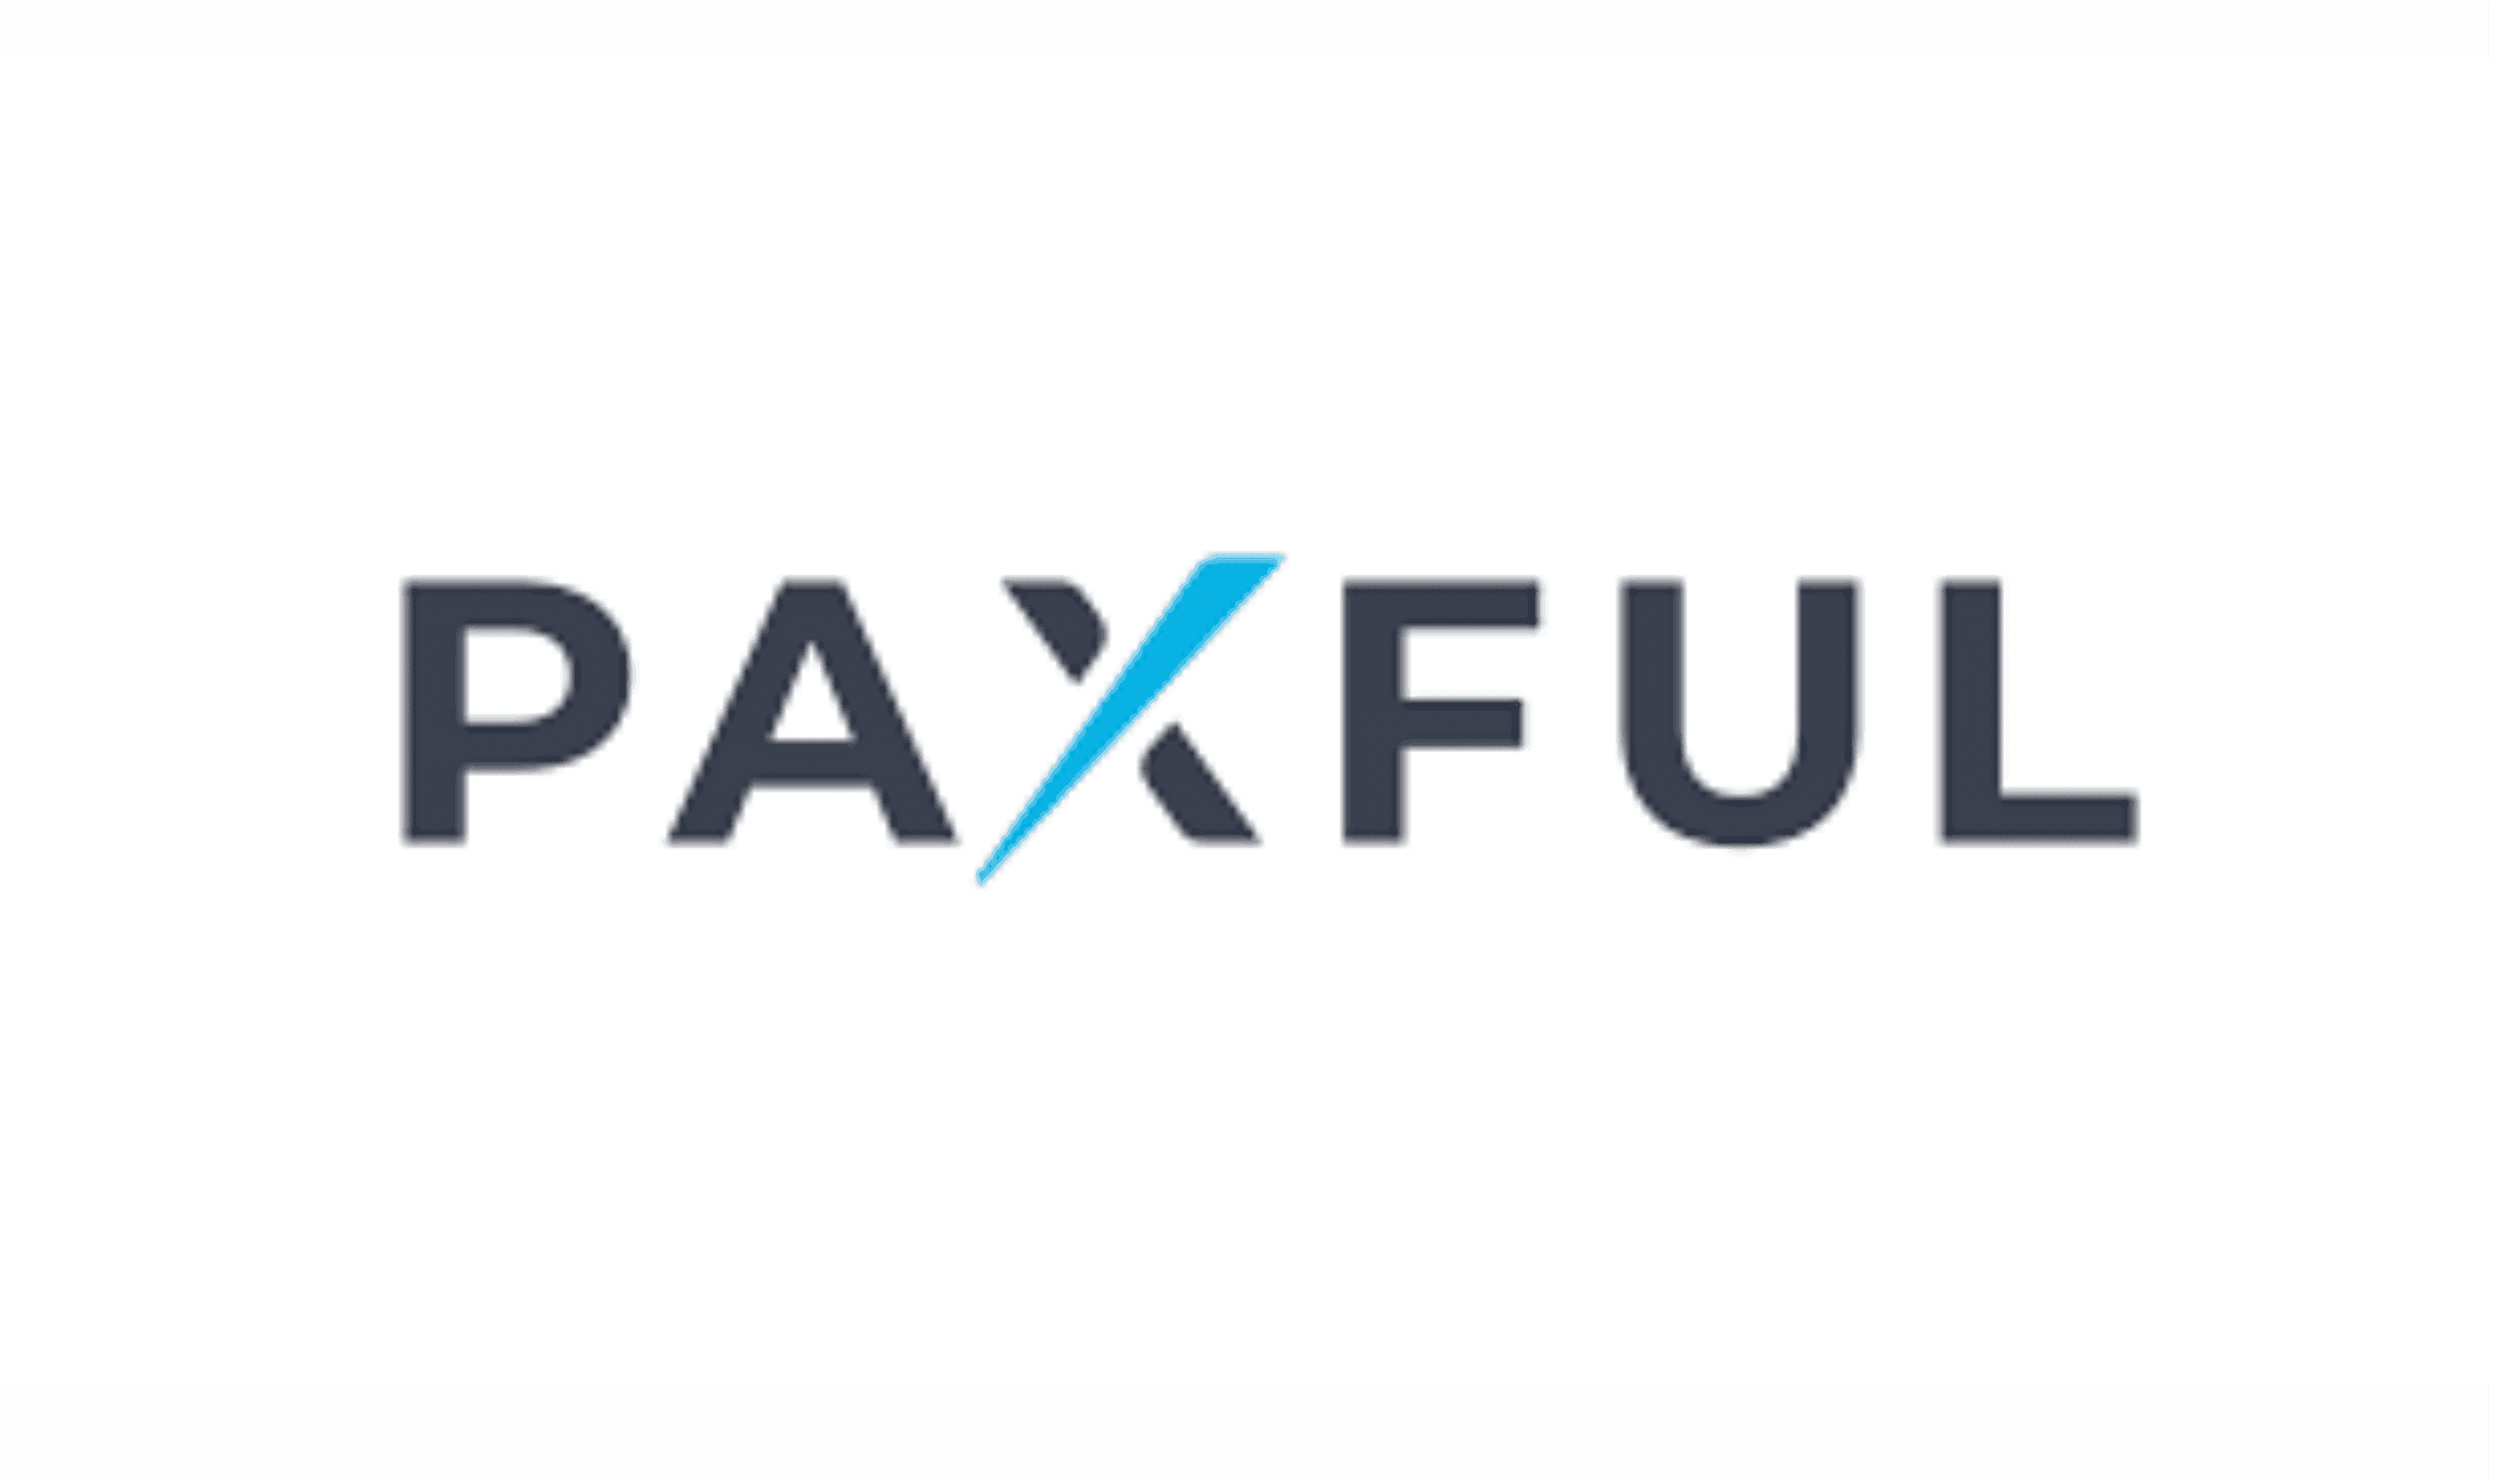 Paxful Expands its Charitable Program in Africa to Combat COVID-19